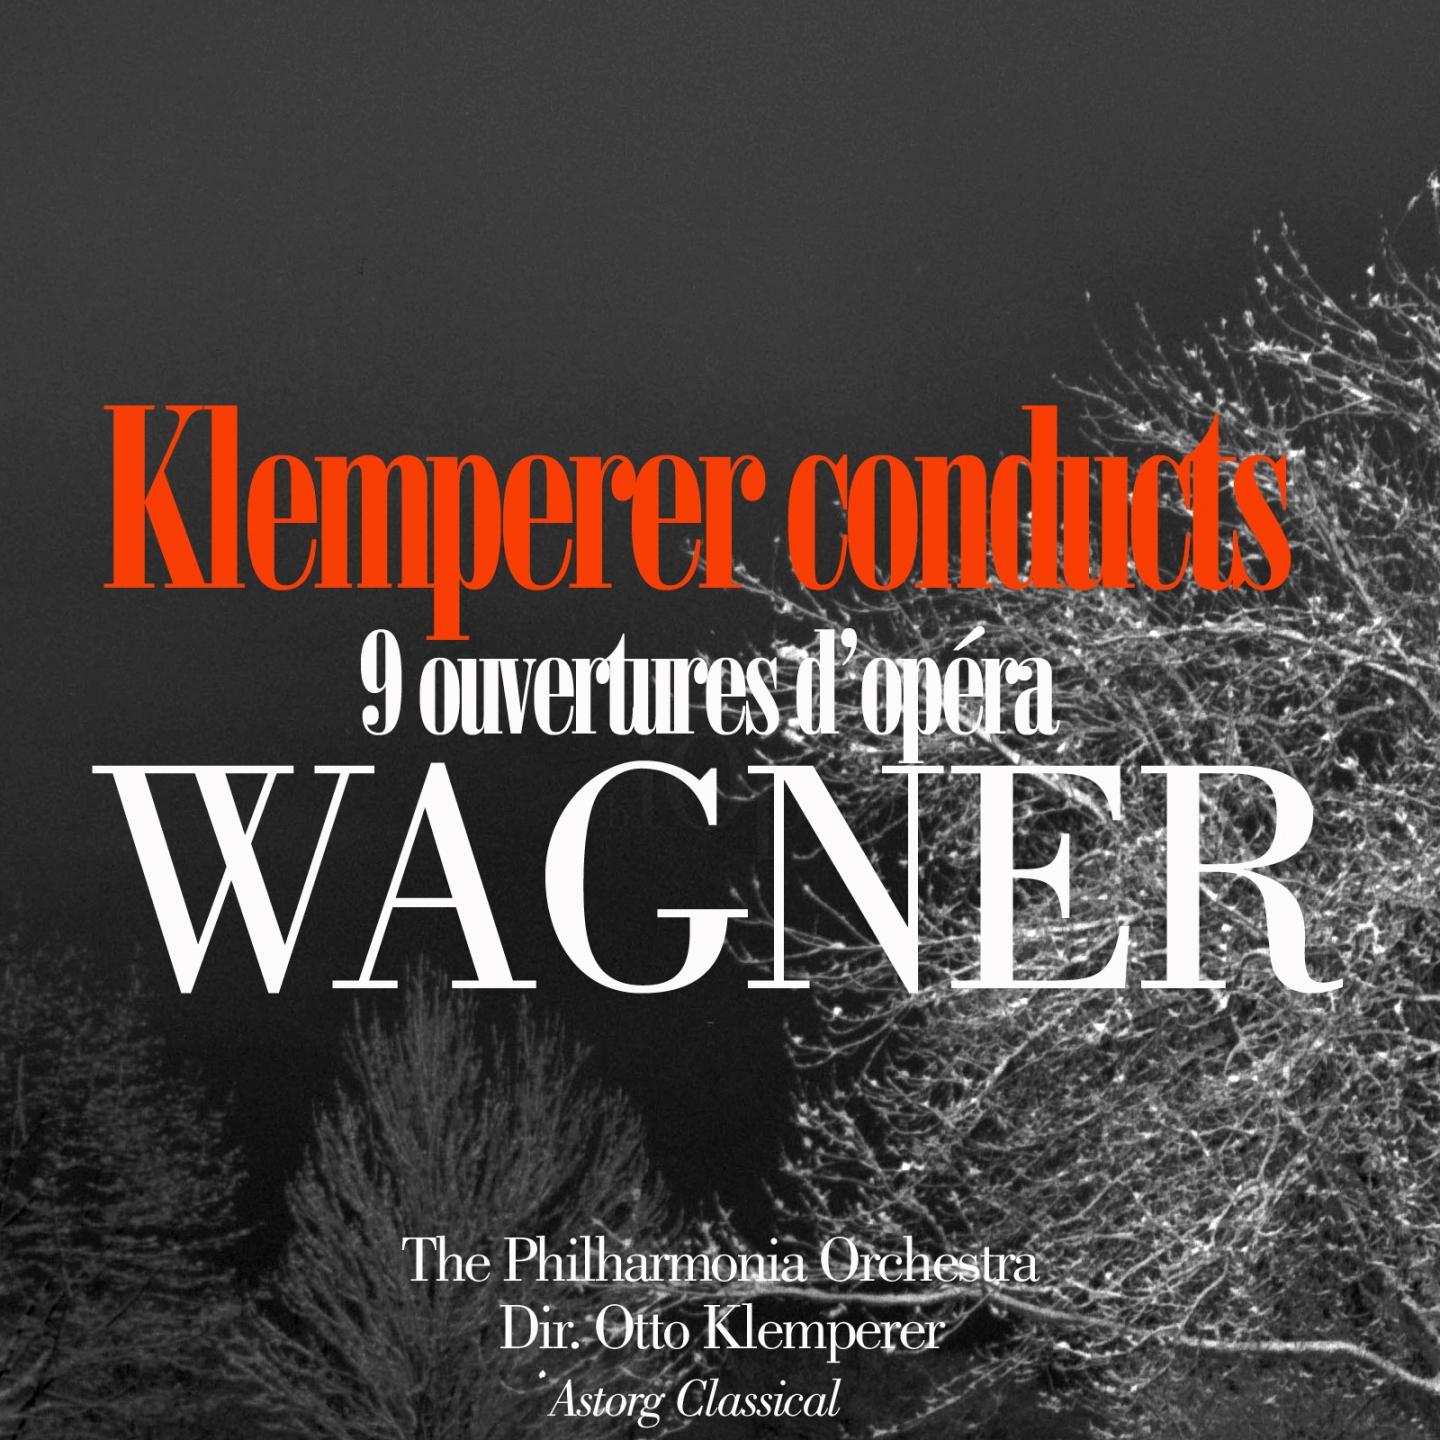 Постер альбома Klemperer conducts Wagner (9 ouvertures d'opéra)